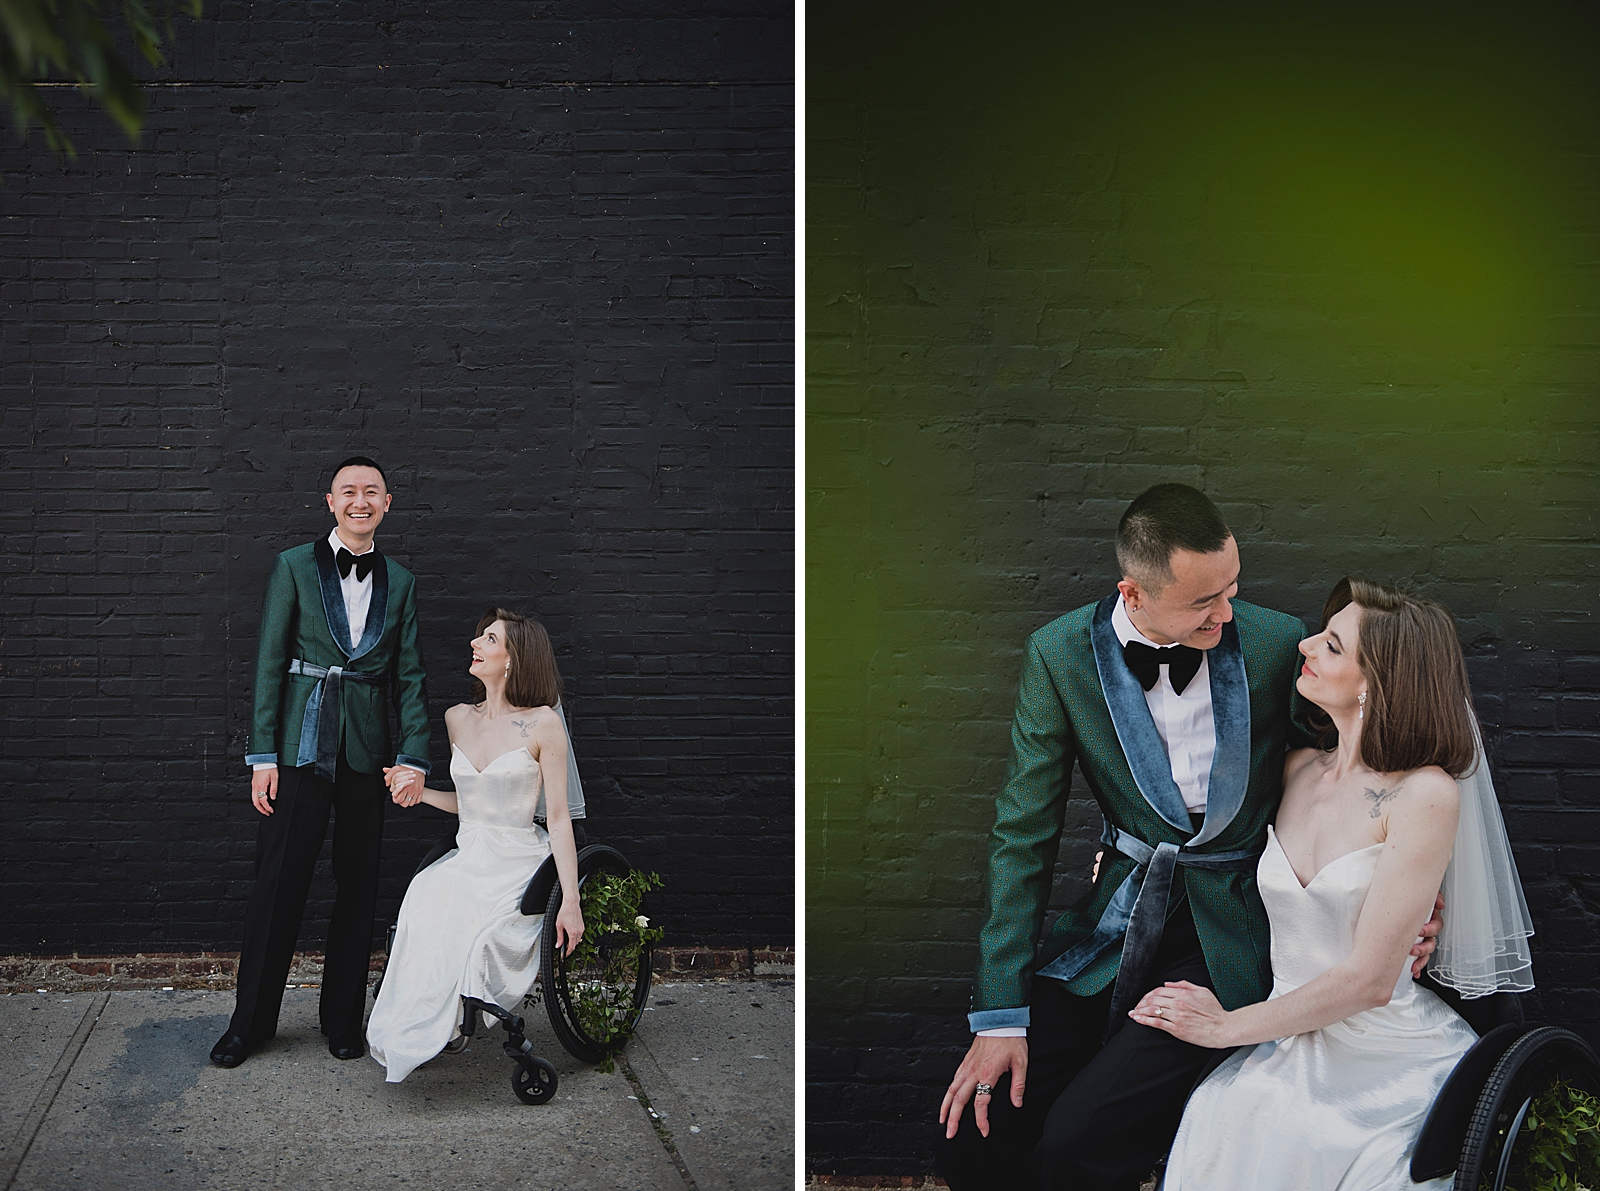 Left photo: Full shot of the bride and groom holding hands and smiling in front of a black brick wall.
Right photo: Upper body shot of the groom leaning against the bride's wheelchair as they smile at each other. 